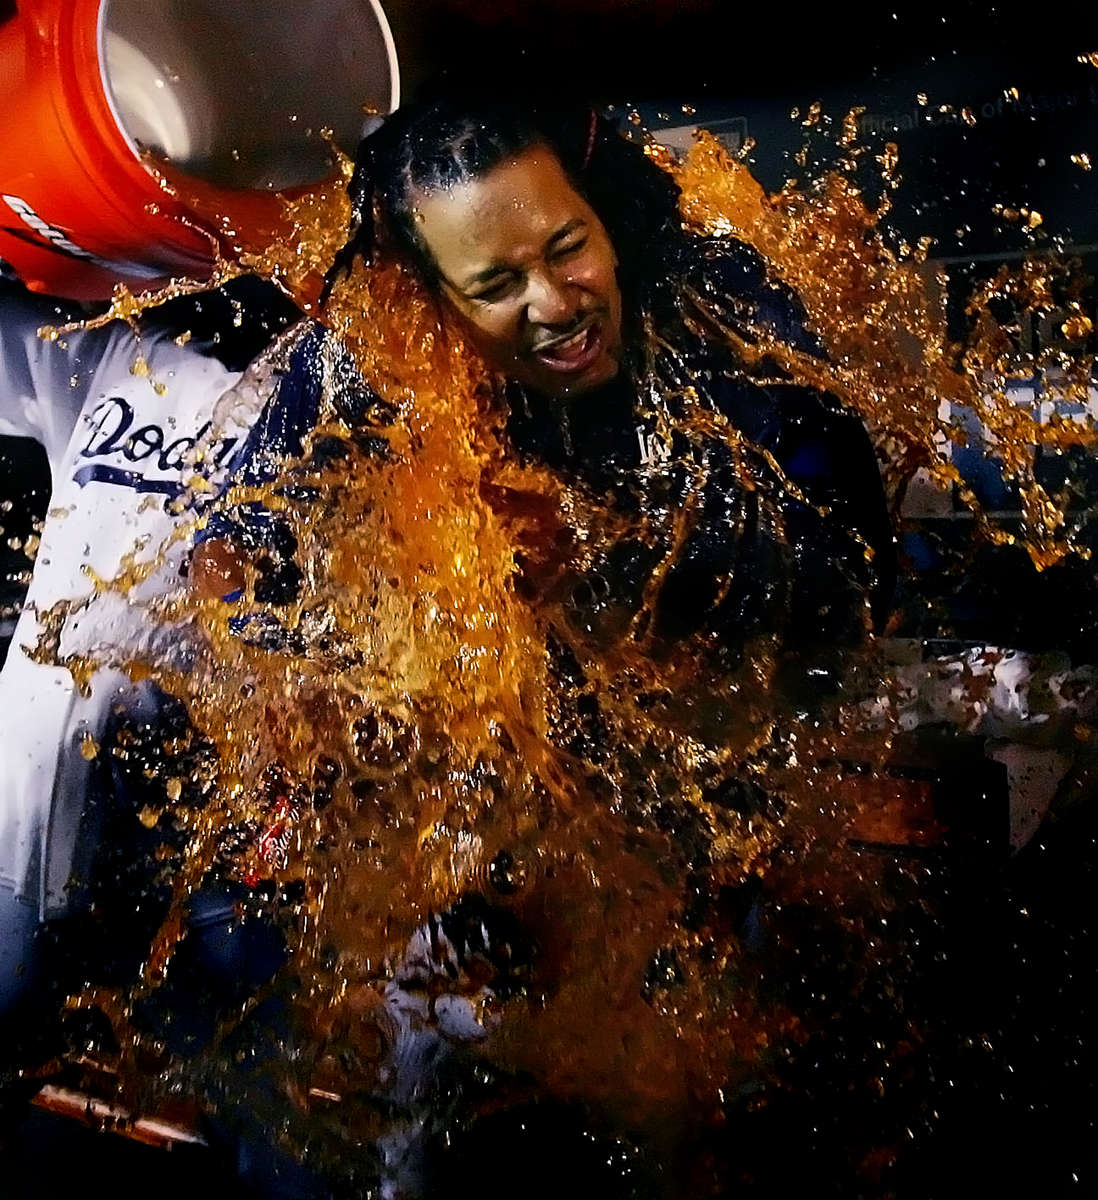 Los Angeles Dodgers outfileder Manny Ramirez gets doused by teammate Takashi Saito after the Dodgers beat the Chicago Cubs 3-1 to win the National League Division Series at Dodgers Stadium in Los Angeles Calif. (The Press-Enterprise/ Mark Zaleski)